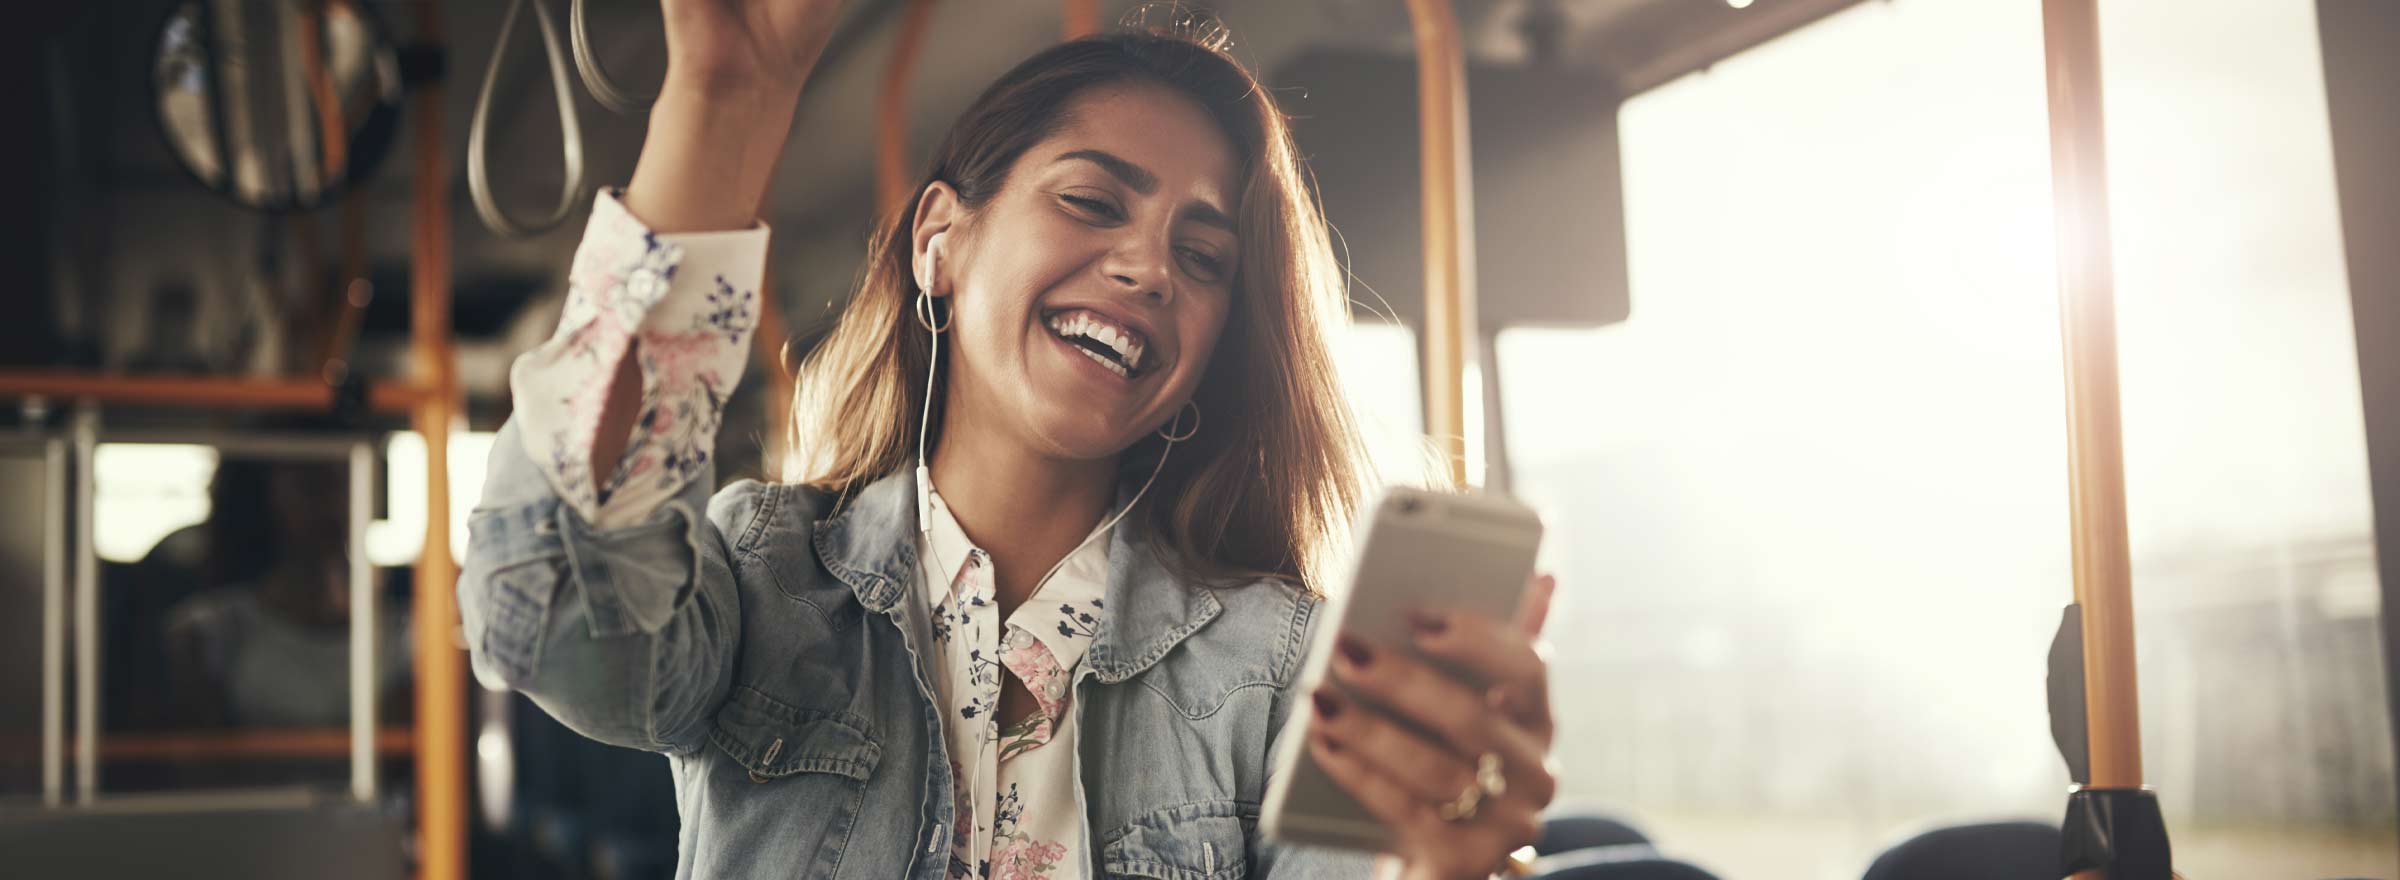 young woman standing on public transit looking at a smartphone and smiling